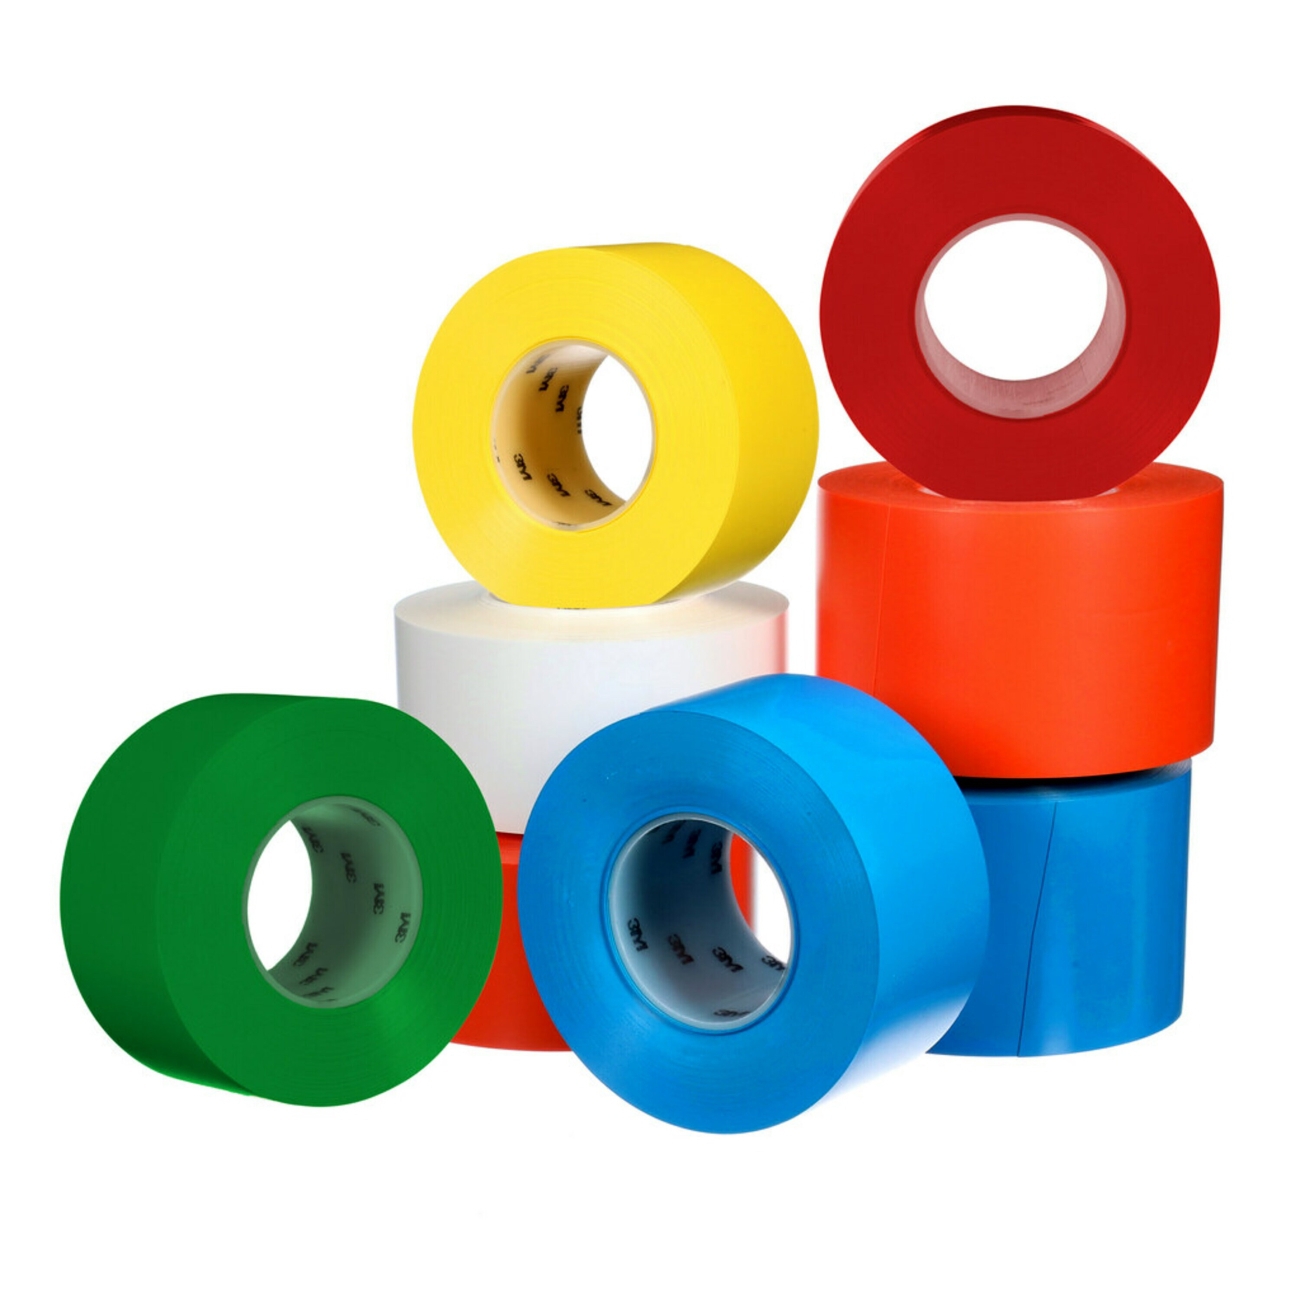 3M extra strong floor marking tape 971, yellow, 101.6mm x 32.9m, 0.43mm